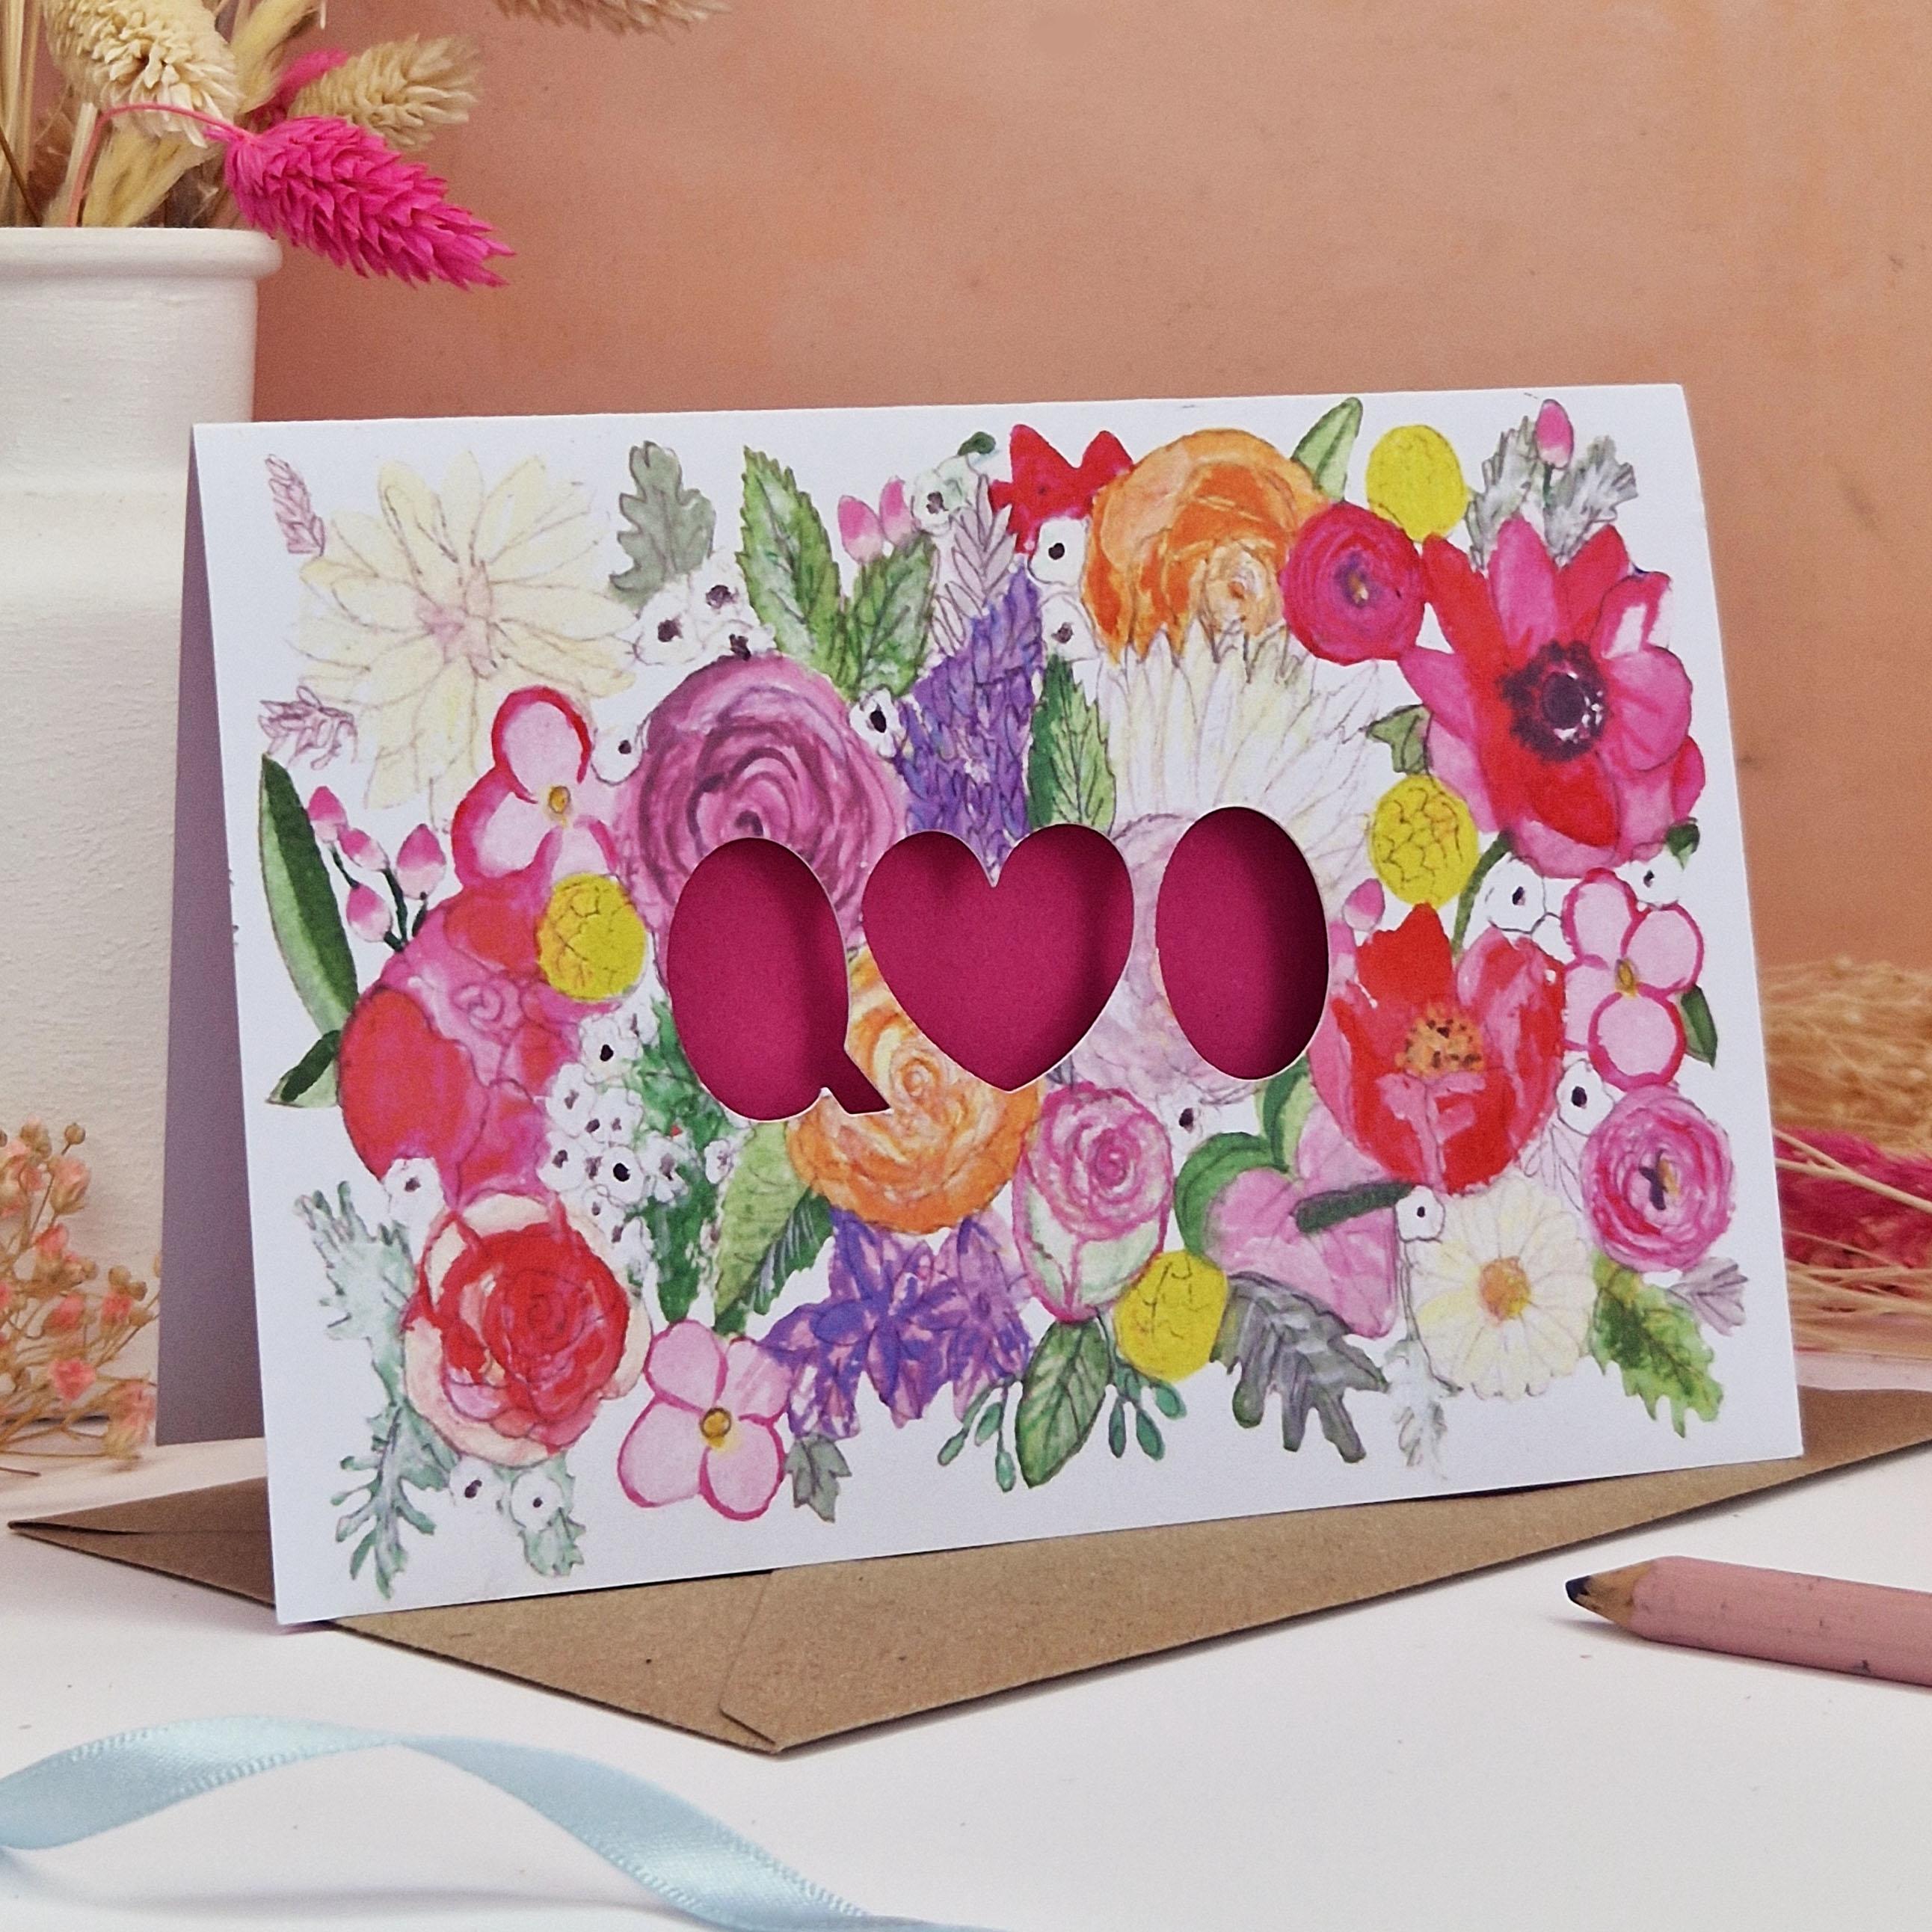 Floral Card with Paper cut text that is personalised with Initials with bright floral background and Yellow paper liner inside.